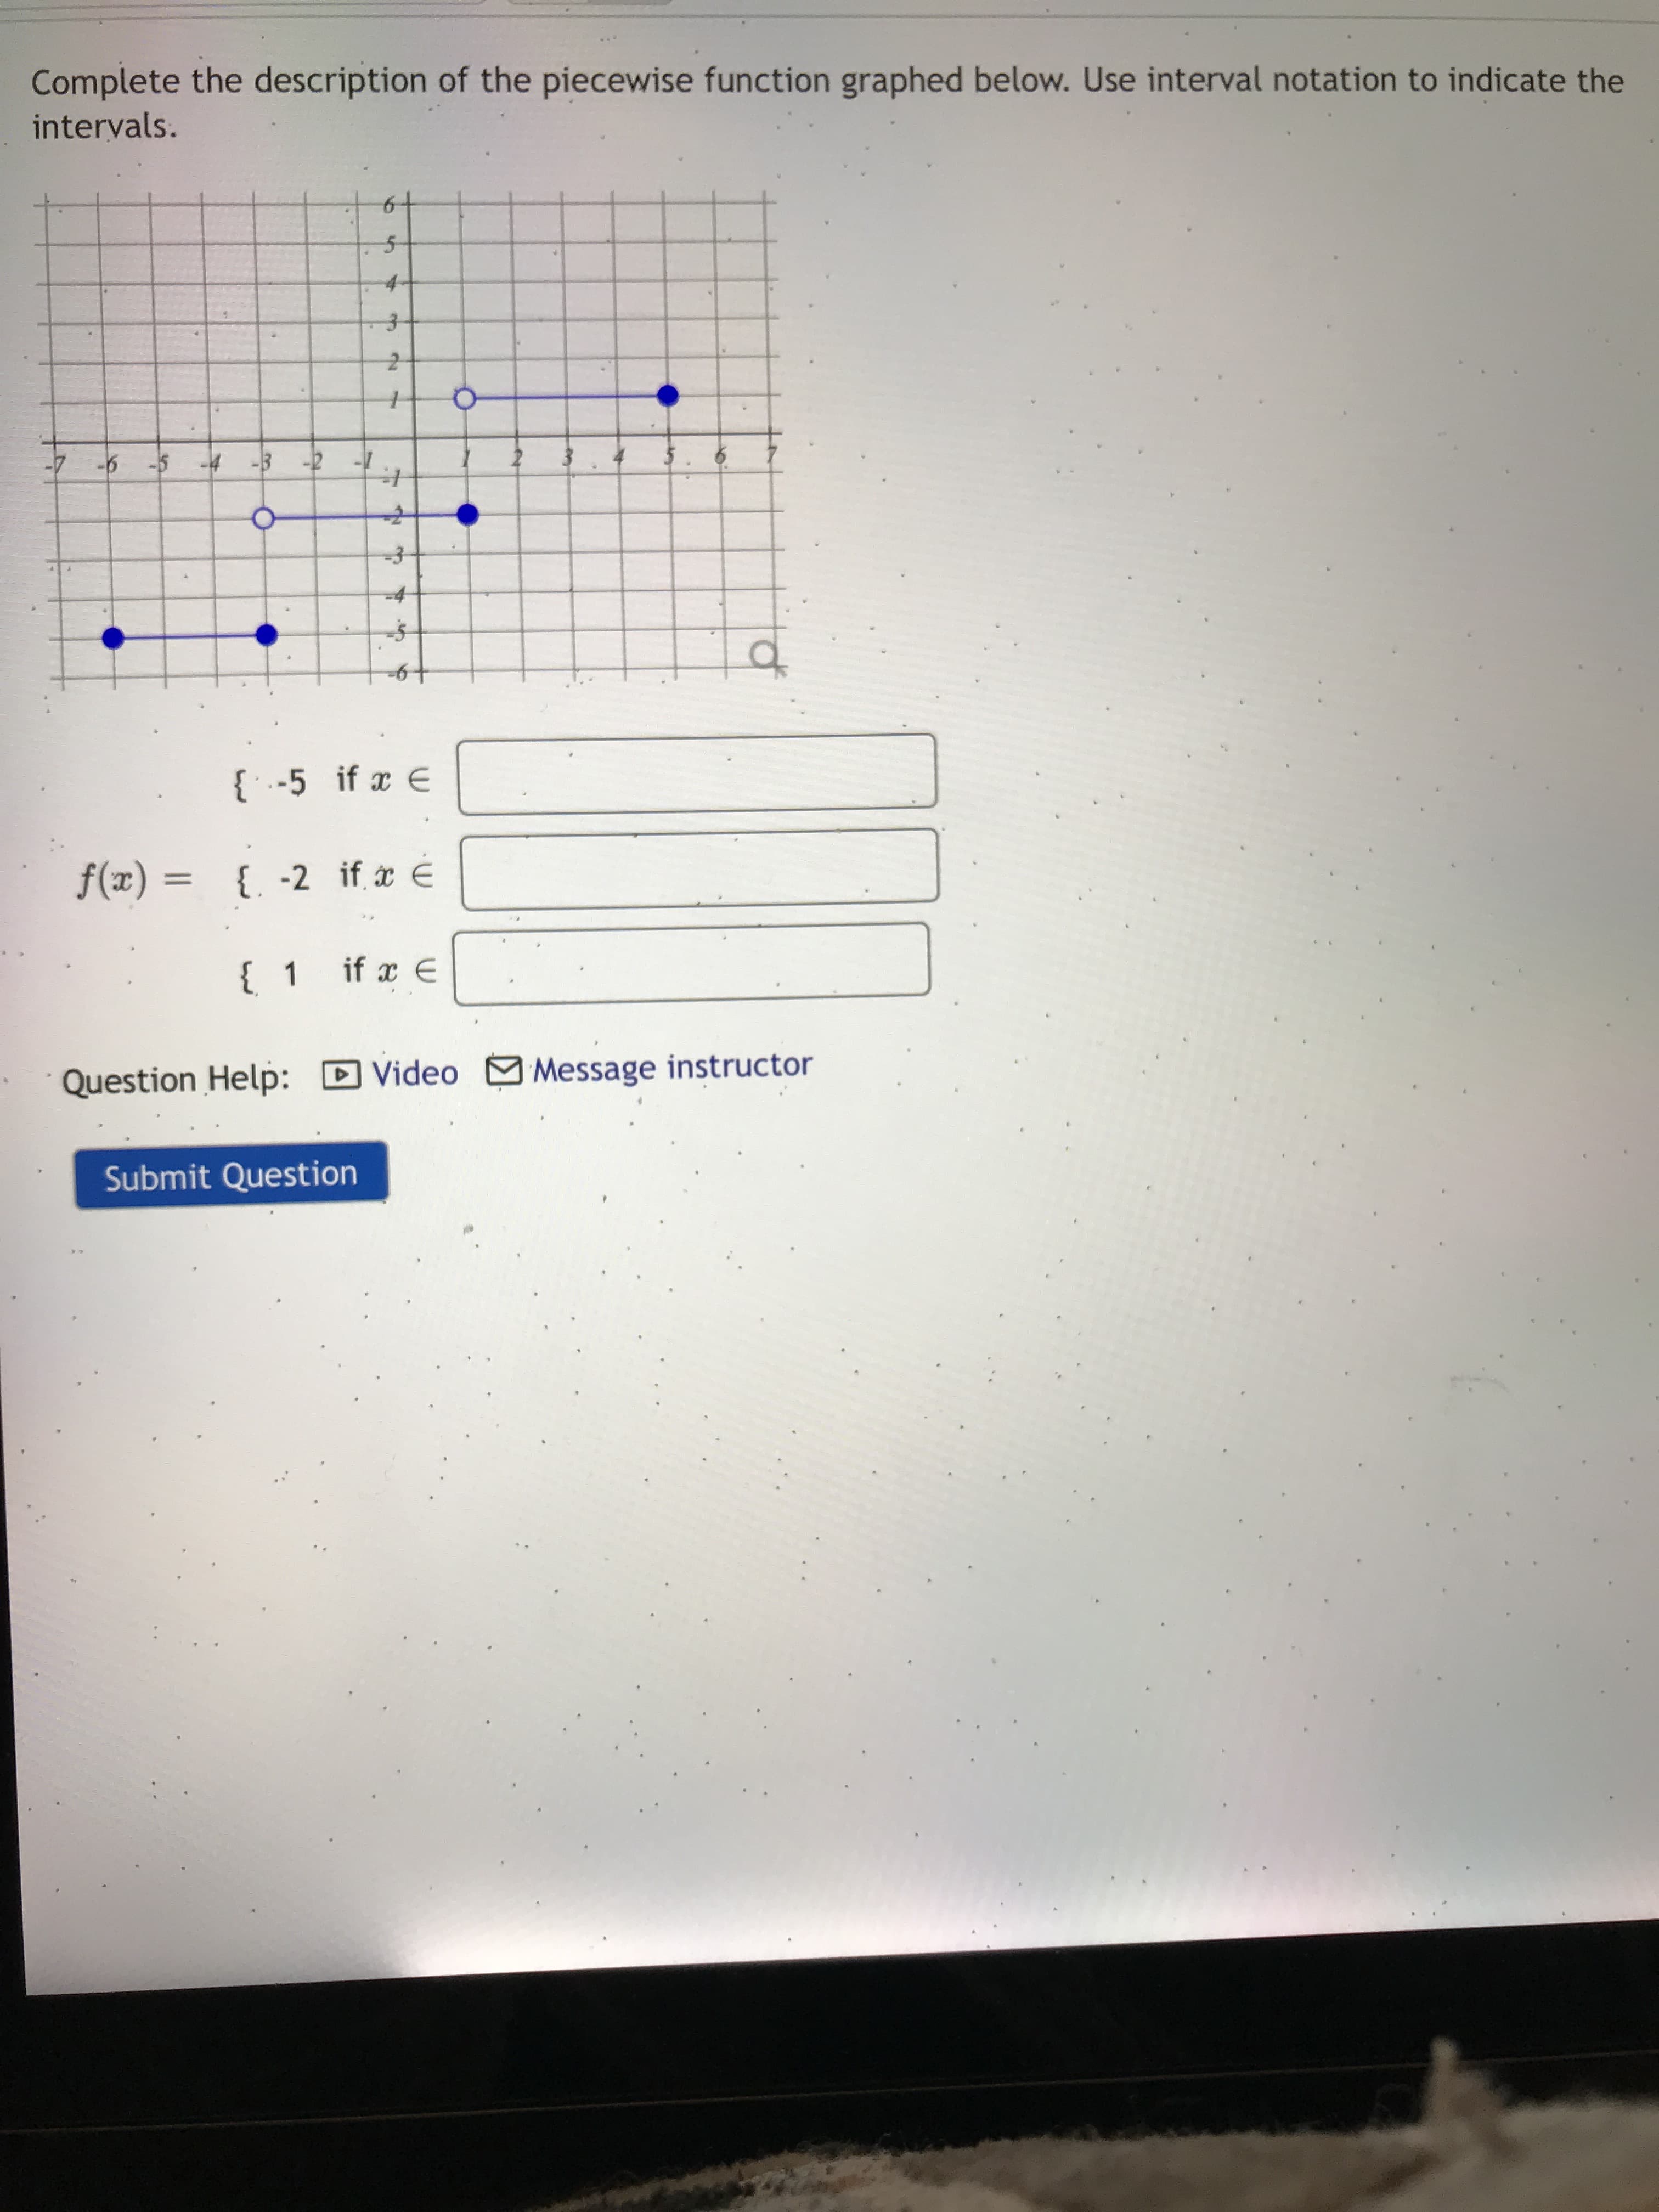 6.
6.
Complete the description of the piecewise function graphed below. Use interval notation to indicate the
intervals.
4-
ㅇ
-4
of
{ ' -5 if x E
%3D
Ə * = (x)f
{ 1 if a
E
Question Help:
DVideo Message instructor
Submit Question
